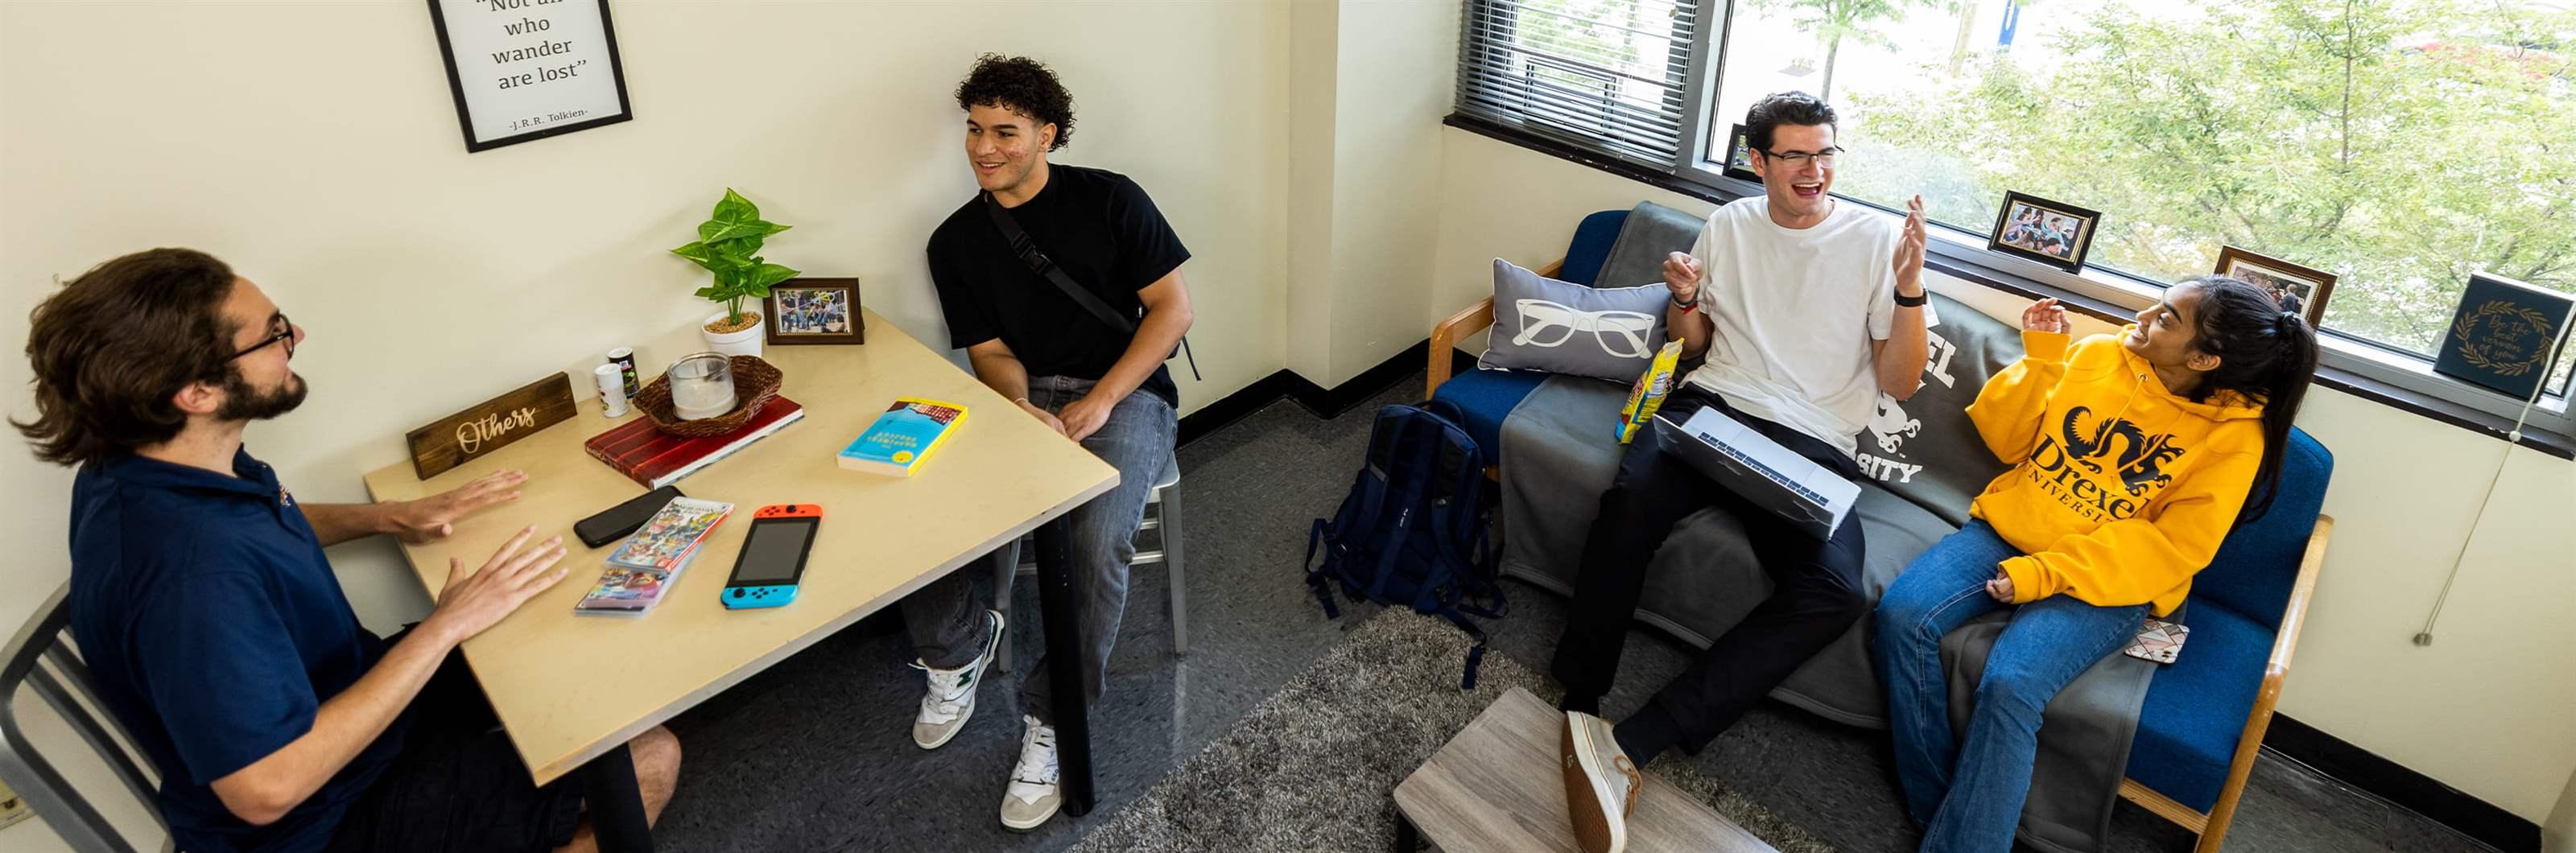 race students in lounge area